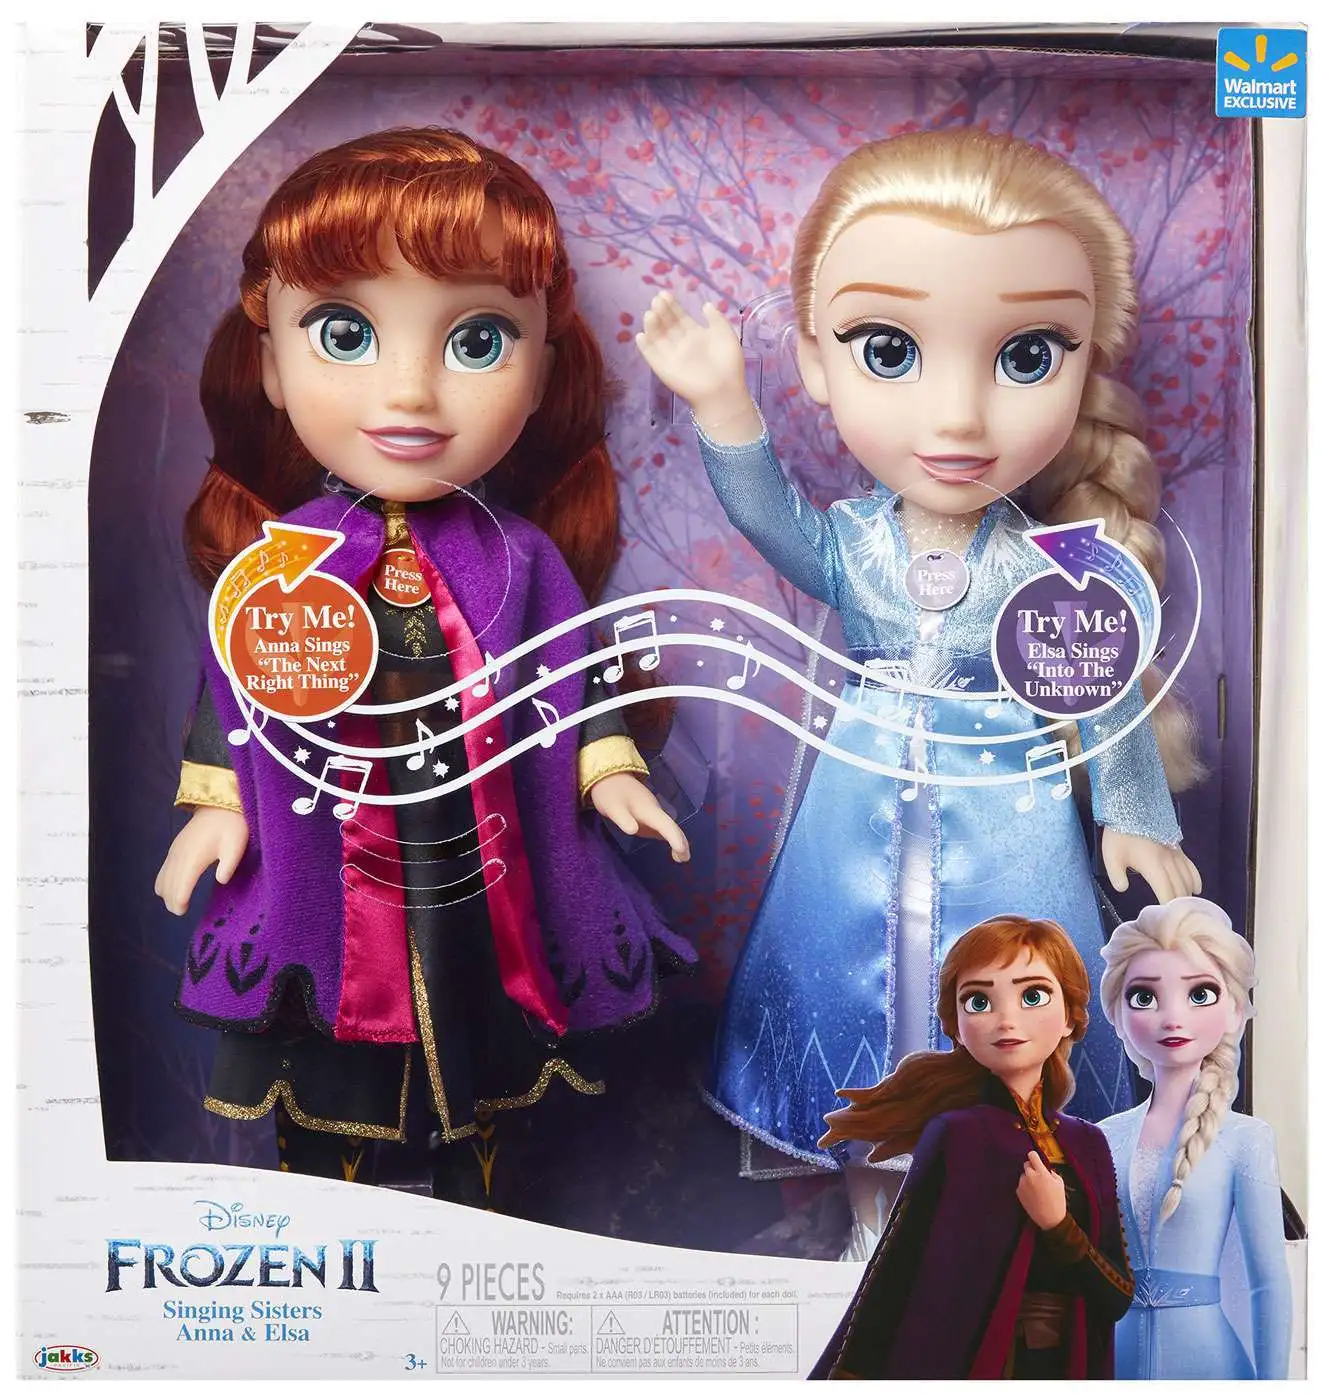 Disney Frozen 2 Elsa Musical Doll Sings Into the Unknown and Features 14 Film Phrases for sale online 